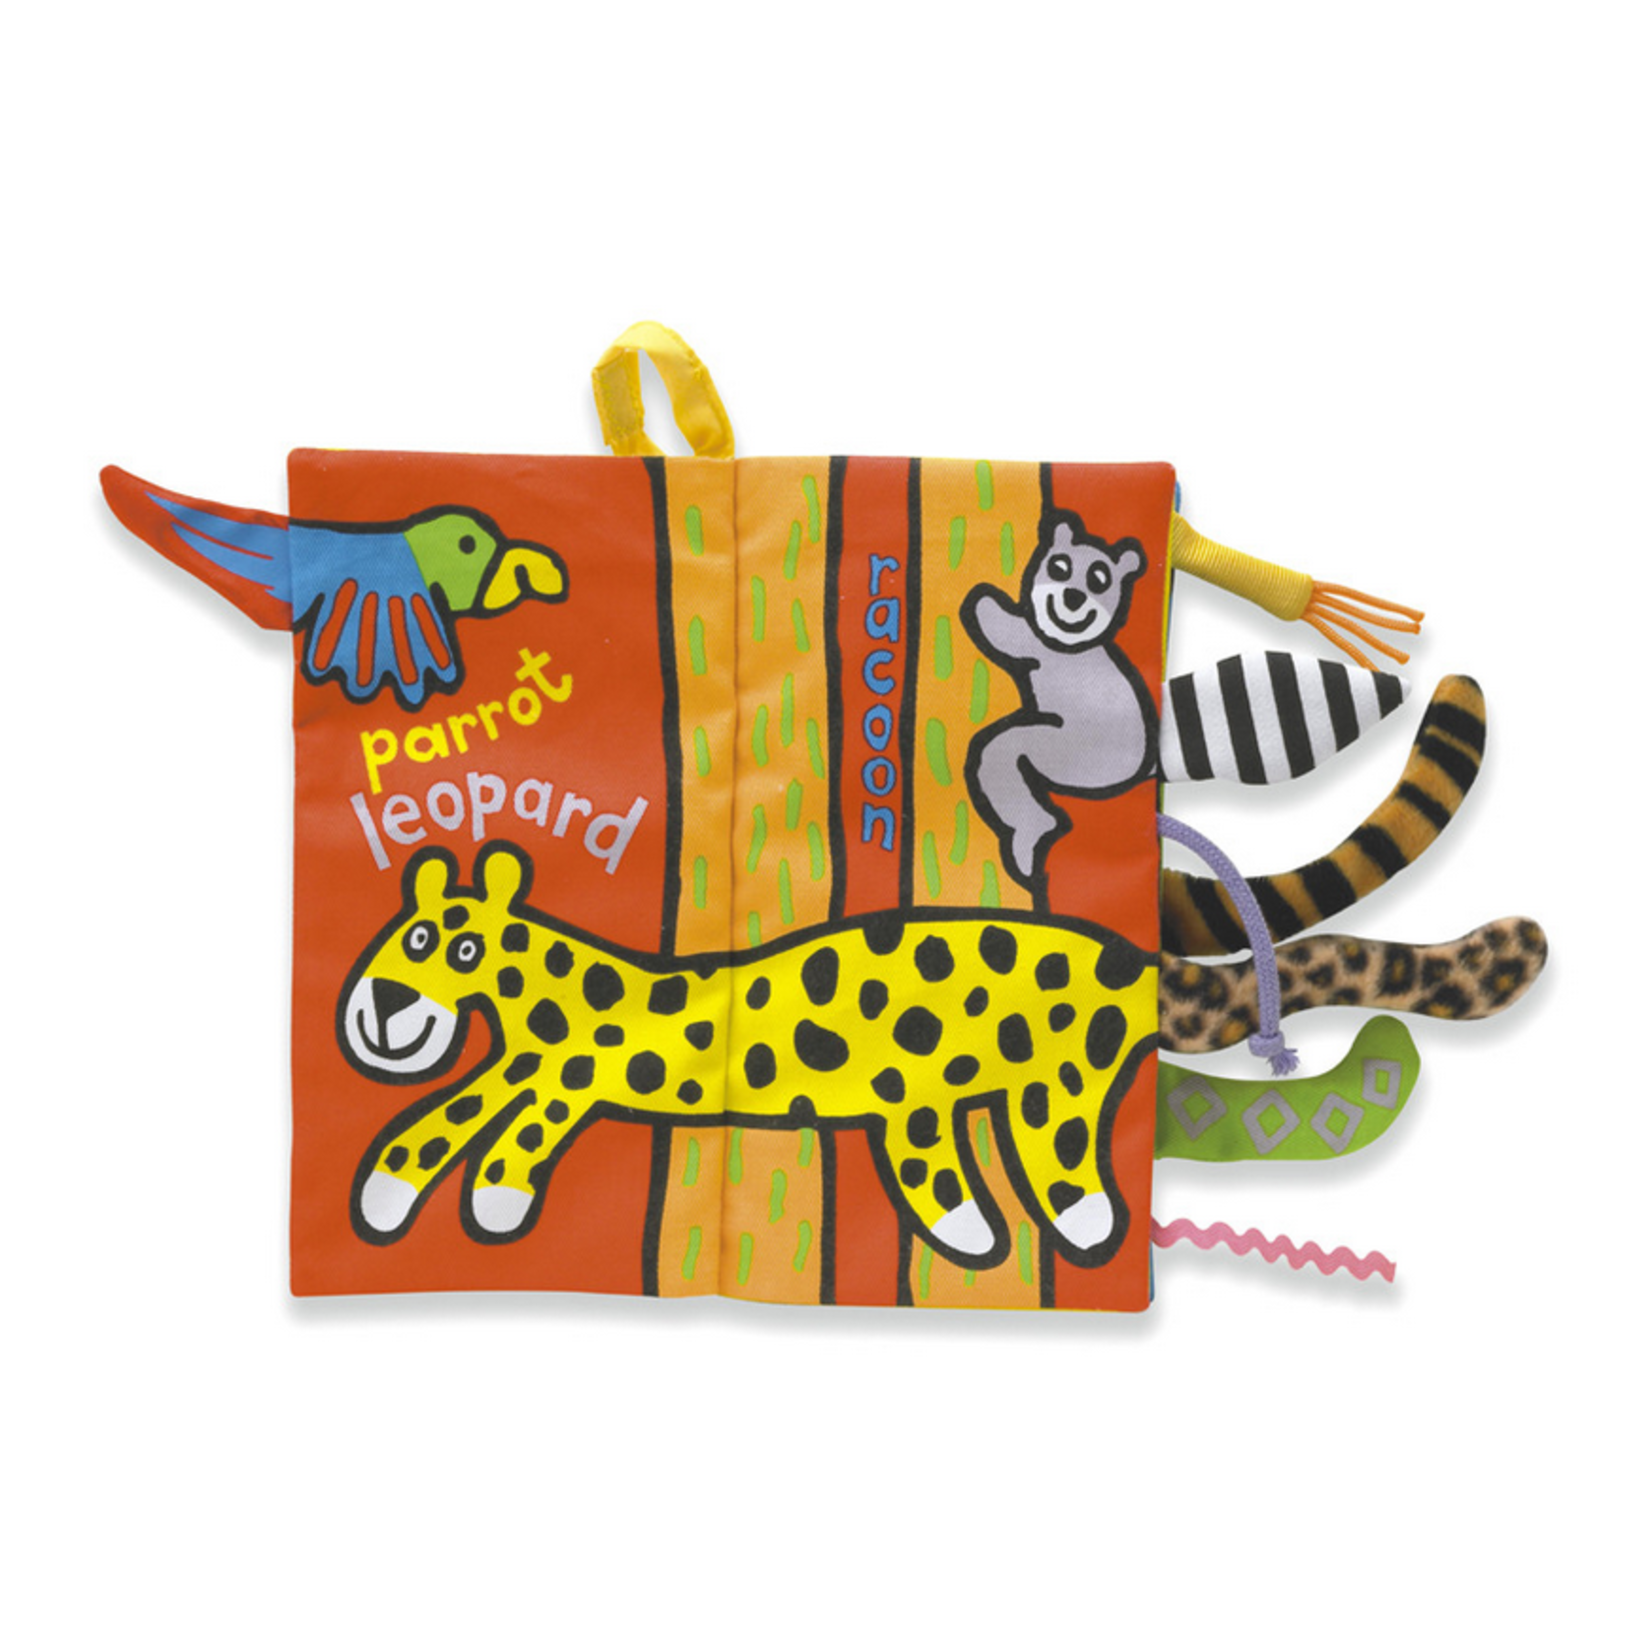 Jellycat JELLYCAT JUNGLY TAILS ACTIVITY BOOK